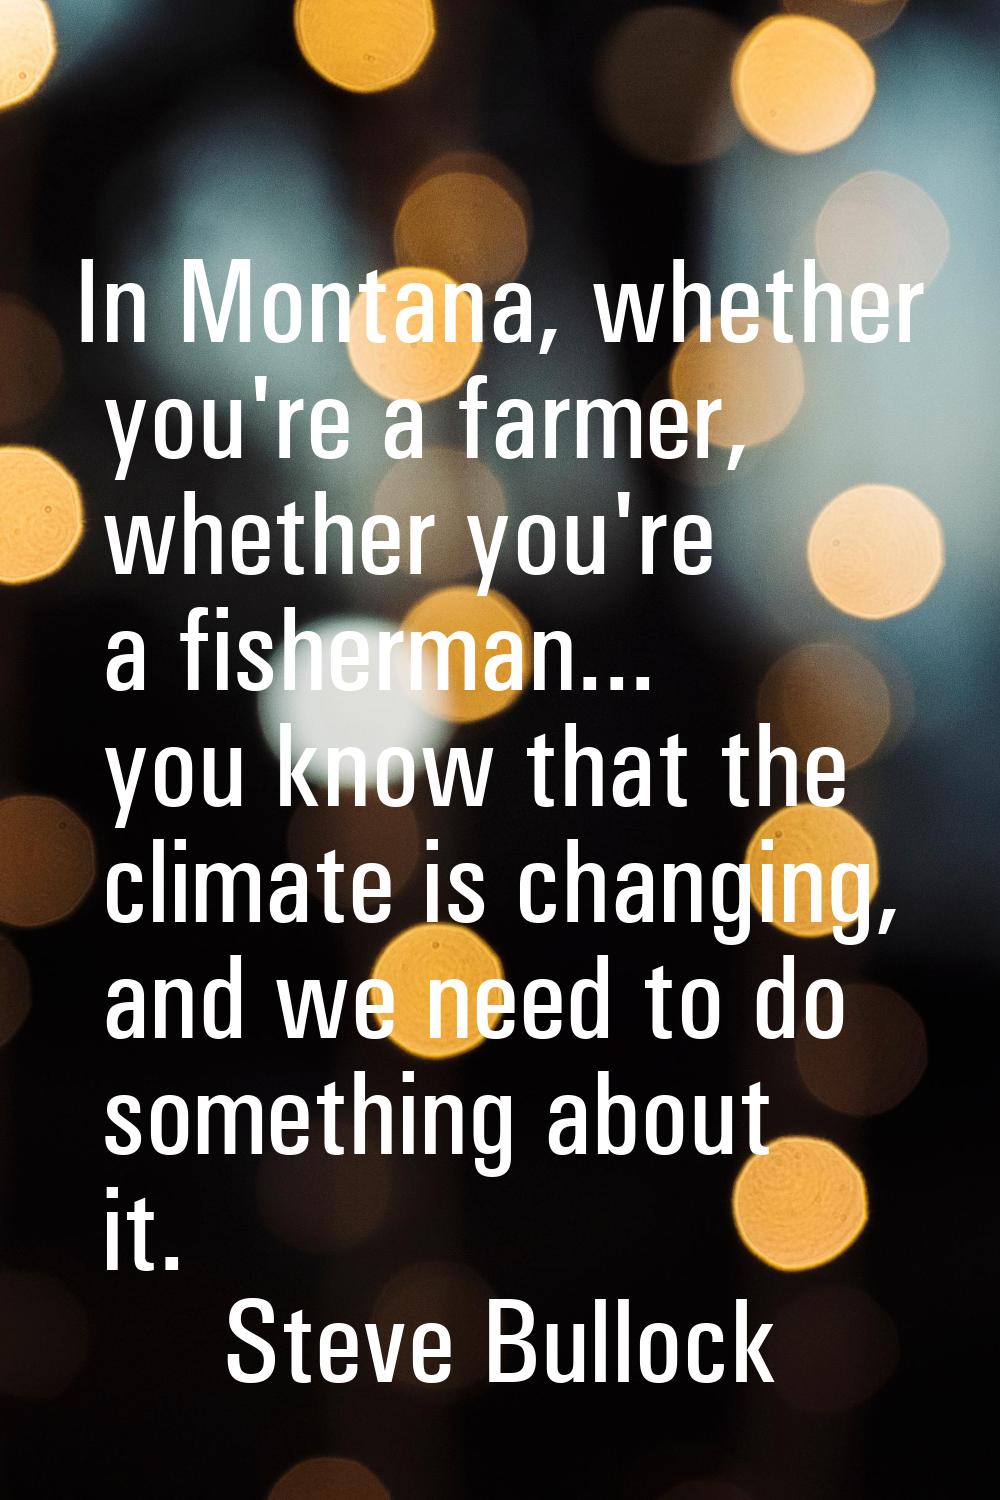 In Montana, whether you're a farmer, whether you're a fisherman... you know that the climate is cha